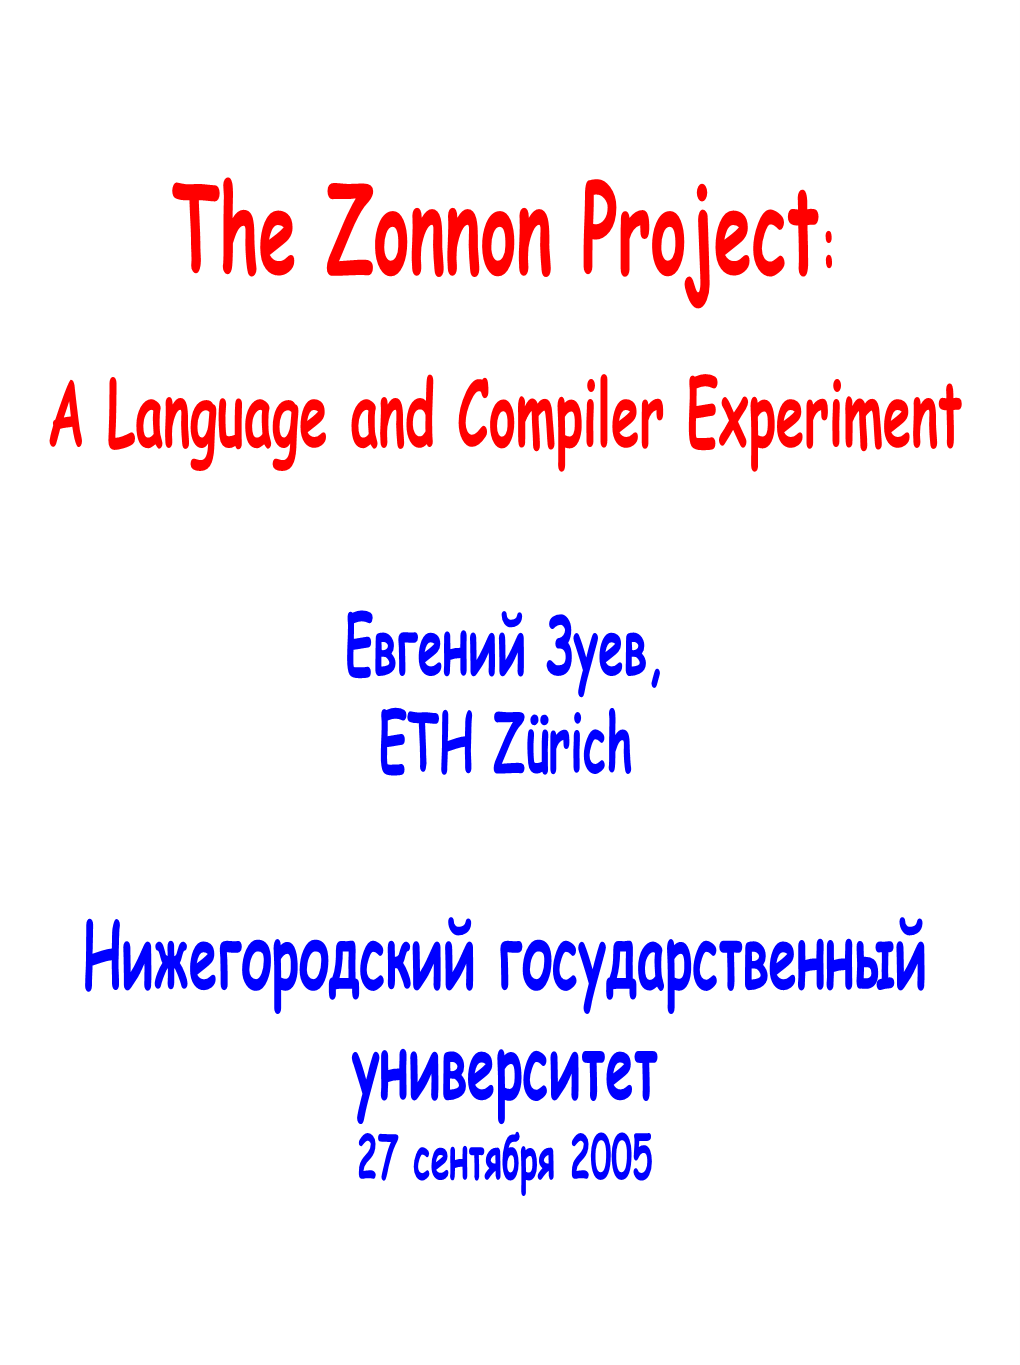 The Zonnon Project: a Language and Compiler Experiment